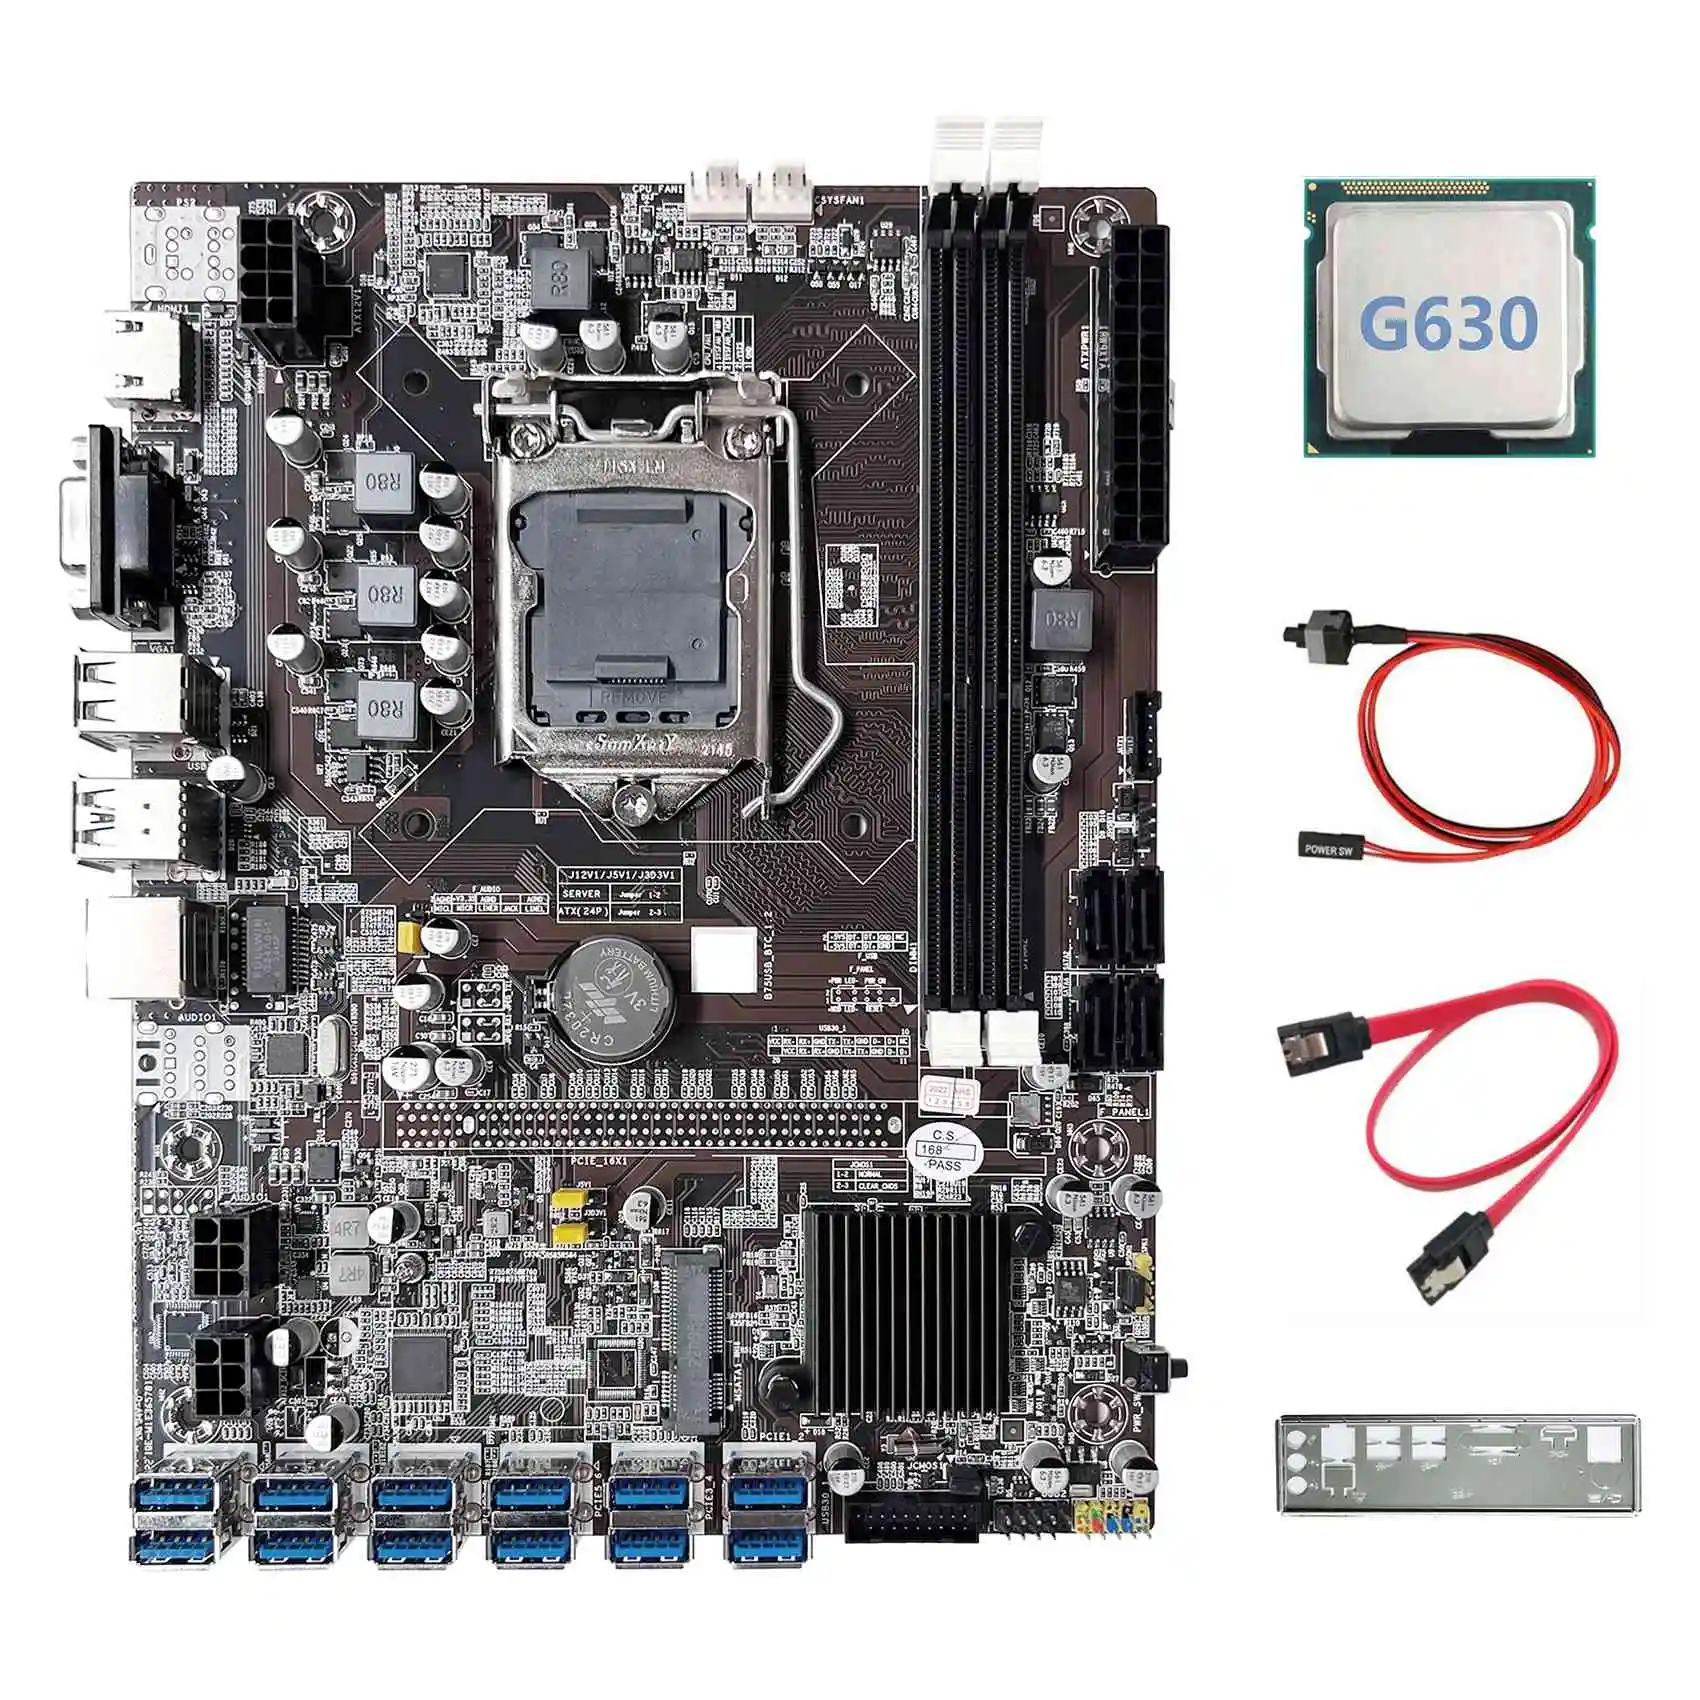 B75 12USB BTC Mining Motherboard+G630 CPU+SATA Cable+Switch Cable+Baffle 12XUSB3.0 B75 ETH Miner Motherboard